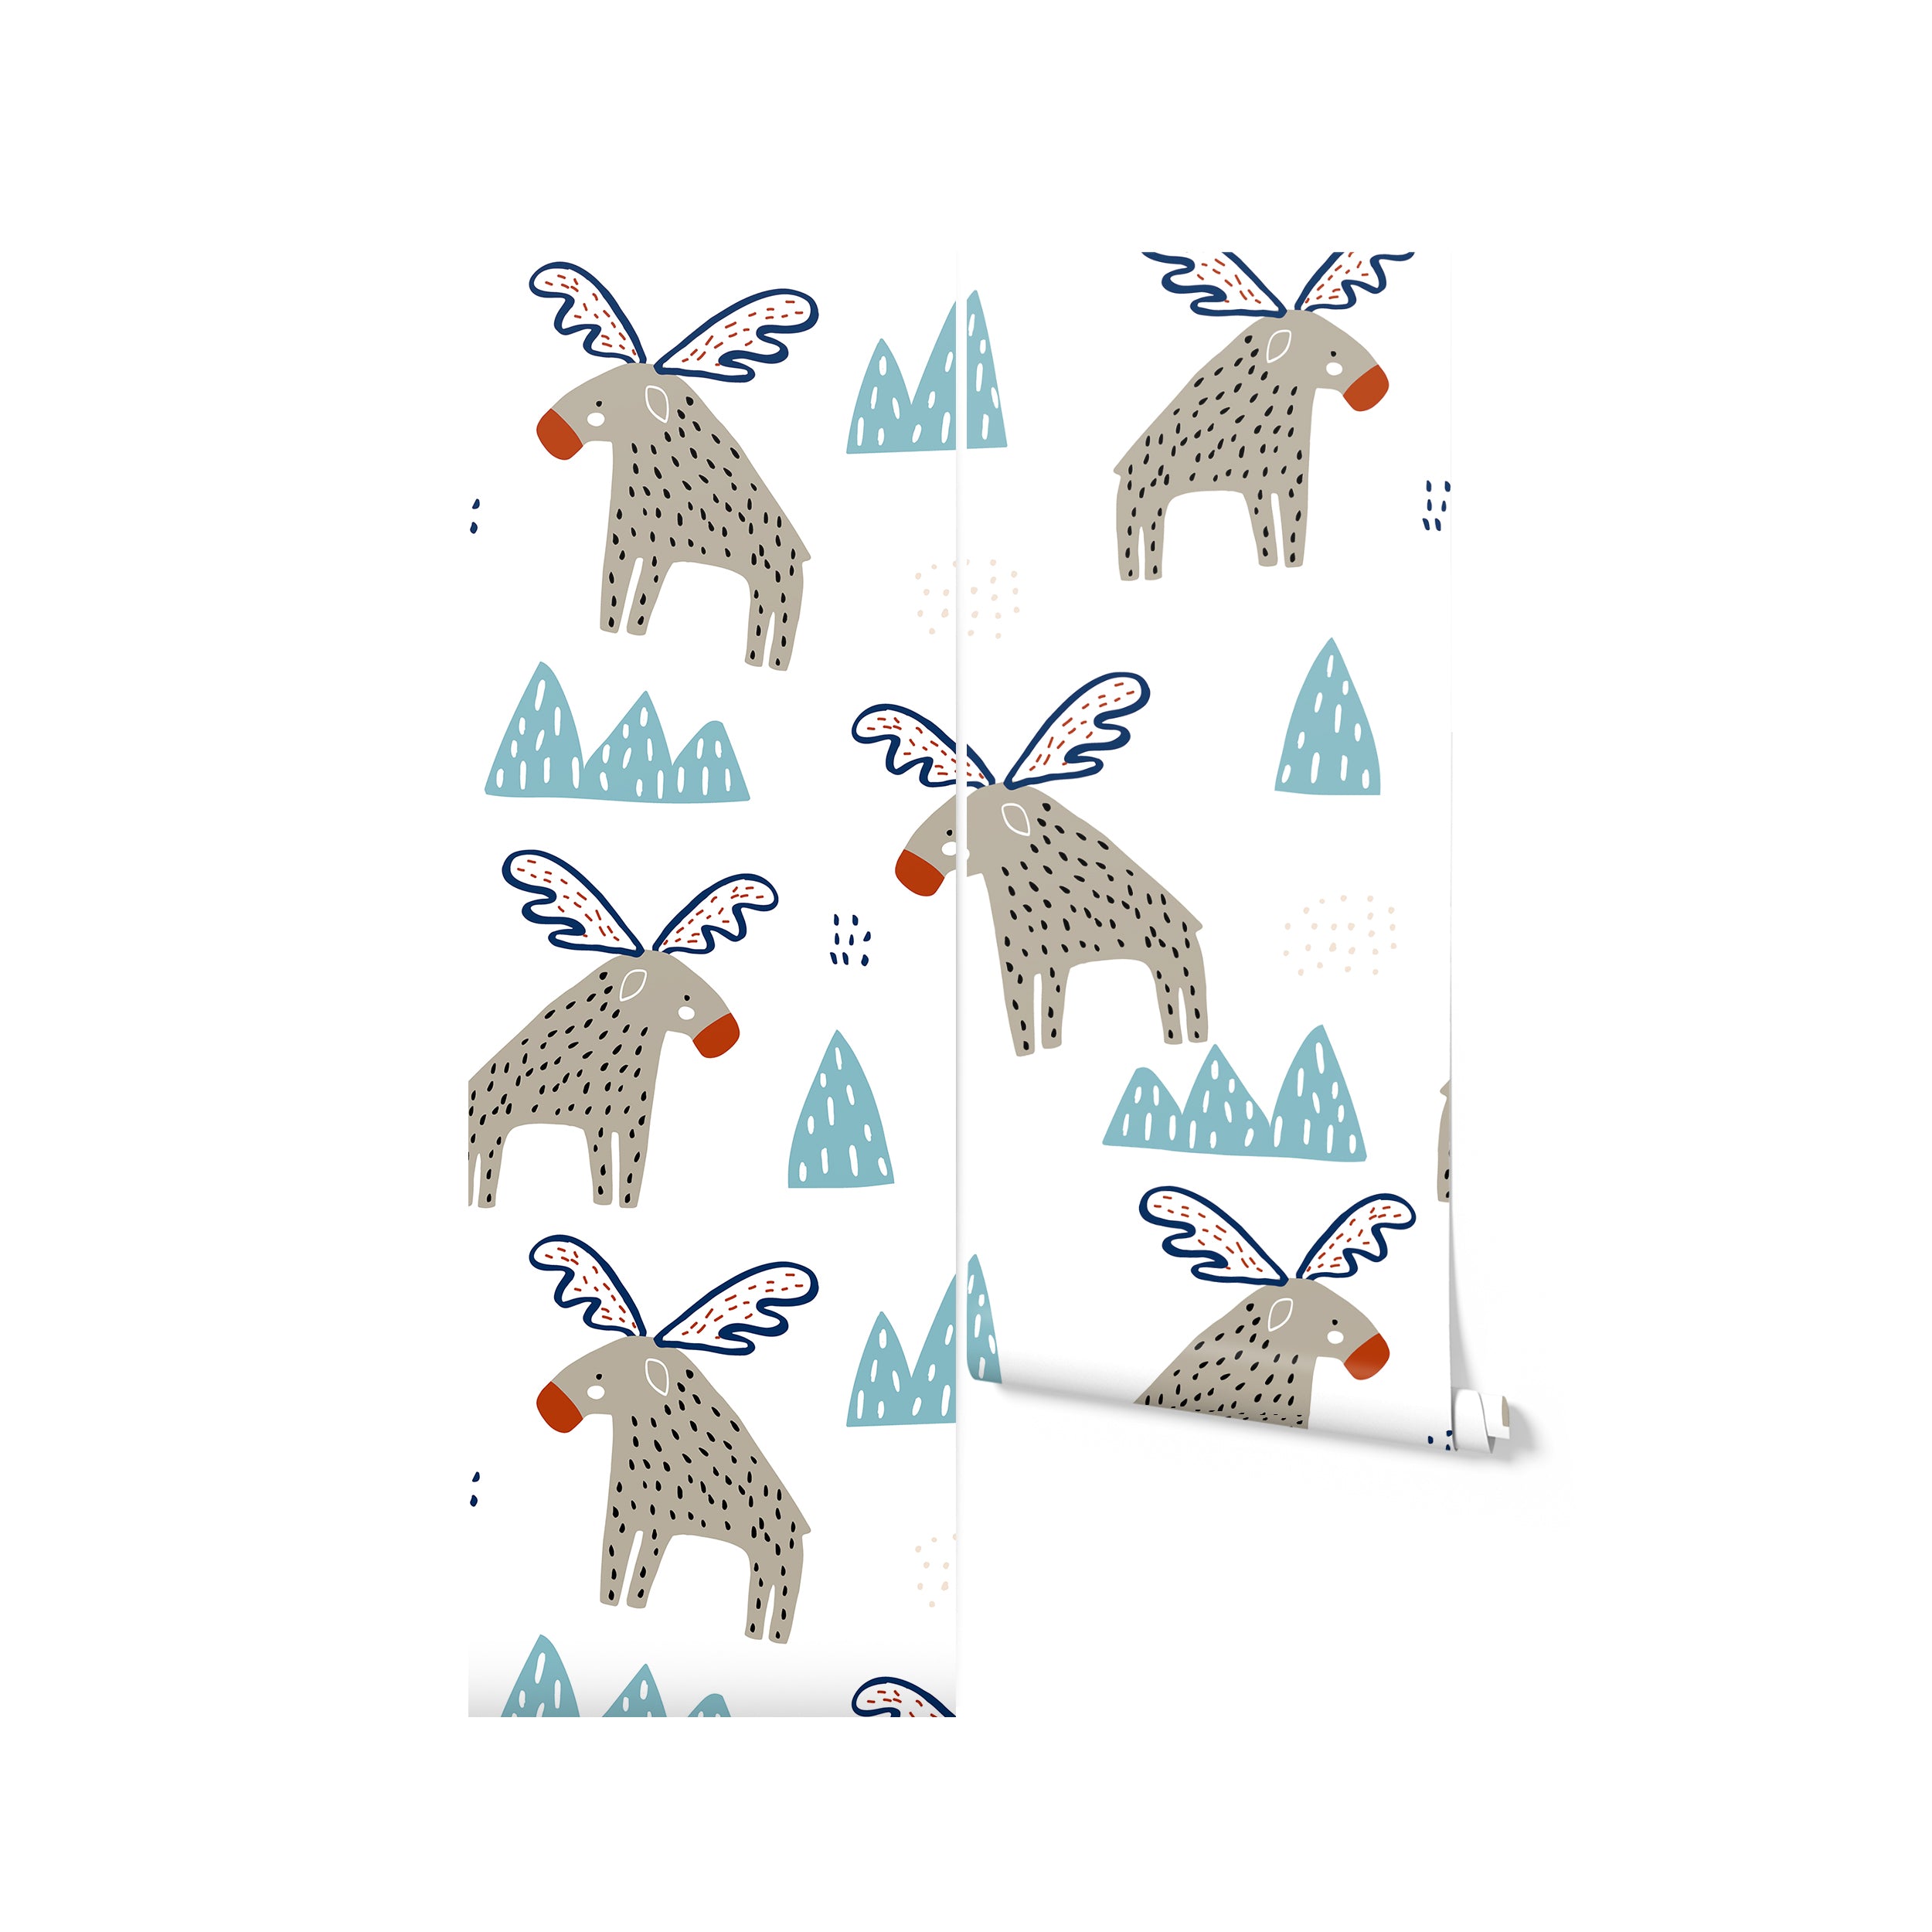 A roll of "Nordic Moose Wallpaper II" displaying an enchanting pattern of gray moose with colorful wings and red noses, set against a backdrop of blue and white mountains and various whimsical shapes, ideal for adding a touch of fantasy and creativity to any child’s room.